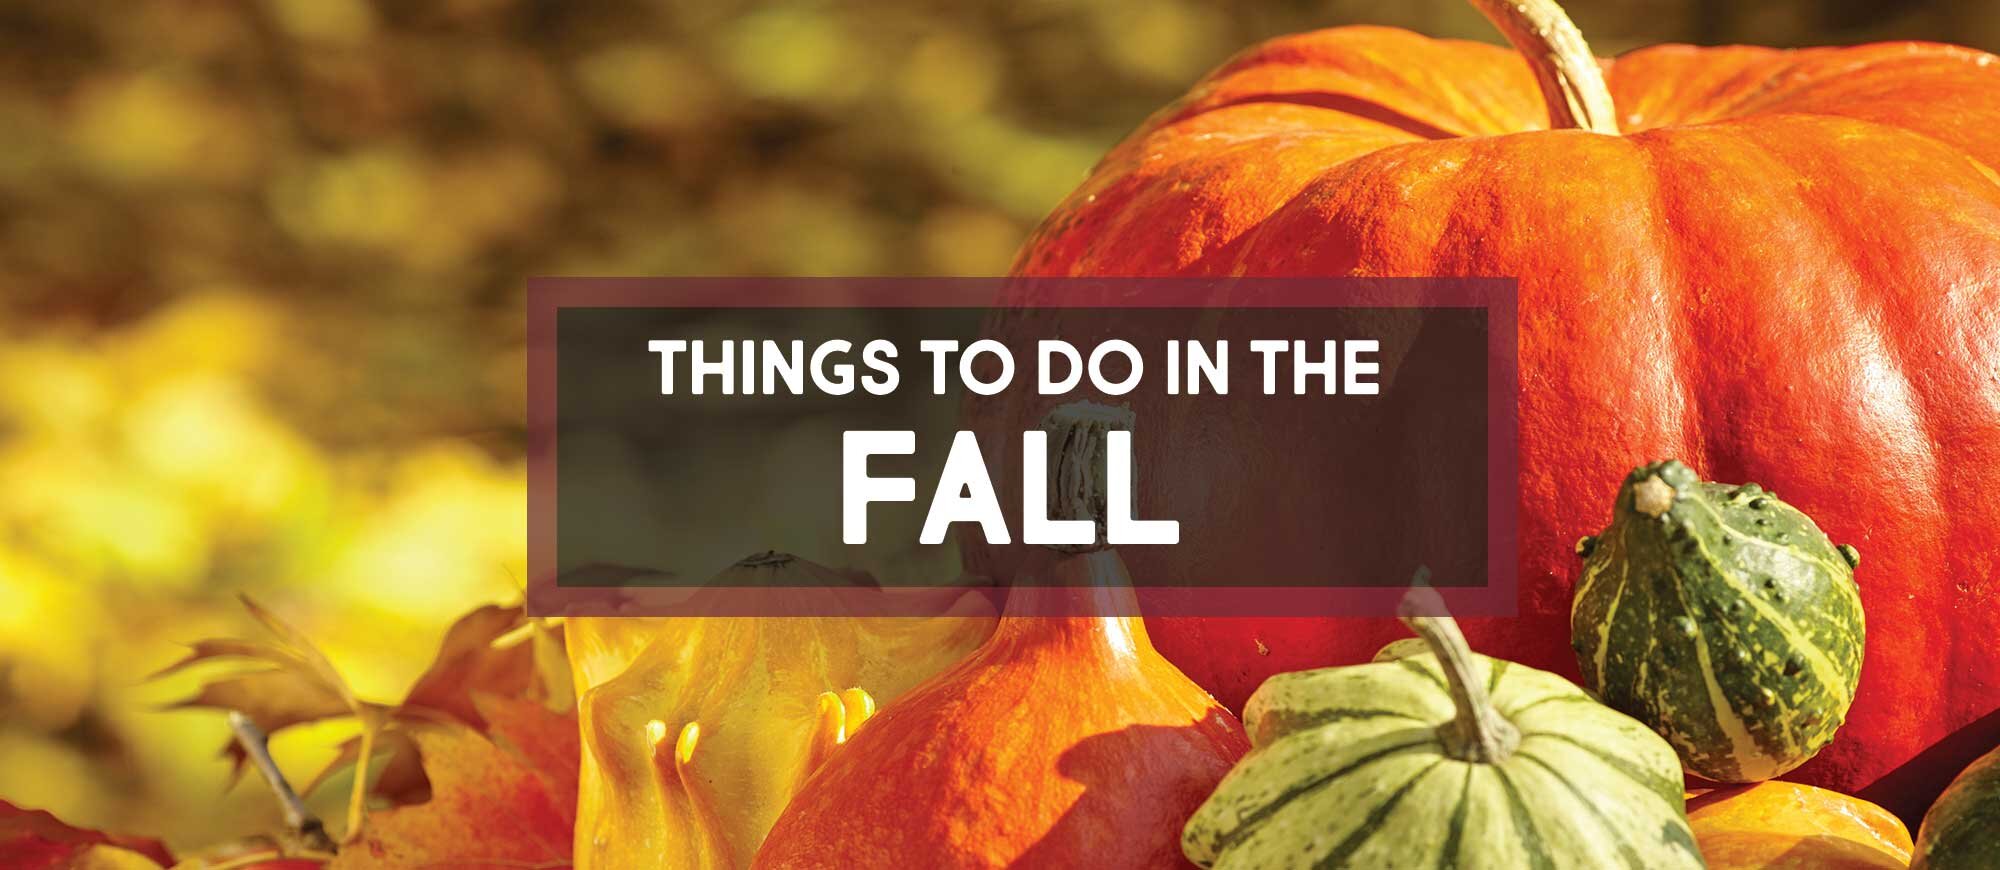 thing-to-do-in-the-fall.jpg